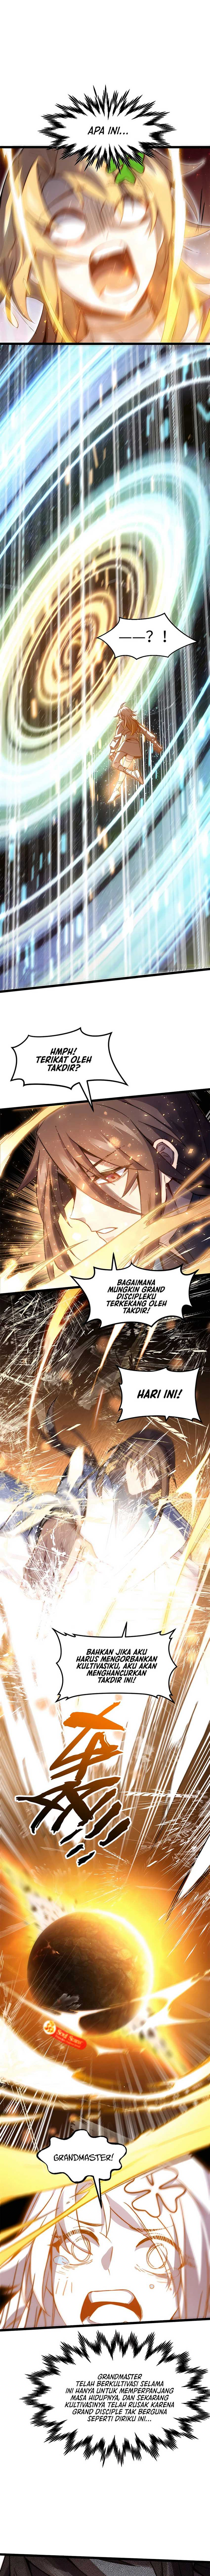 Dilarang COPAS - situs resmi www.mangacanblog.com - Komik top tier providence secretly cultivate for a thousand years 126 - chapter 126 127 Indonesia top tier providence secretly cultivate for a thousand years 126 - chapter 126 Terbaru 13|Baca Manga Komik Indonesia|Mangacan